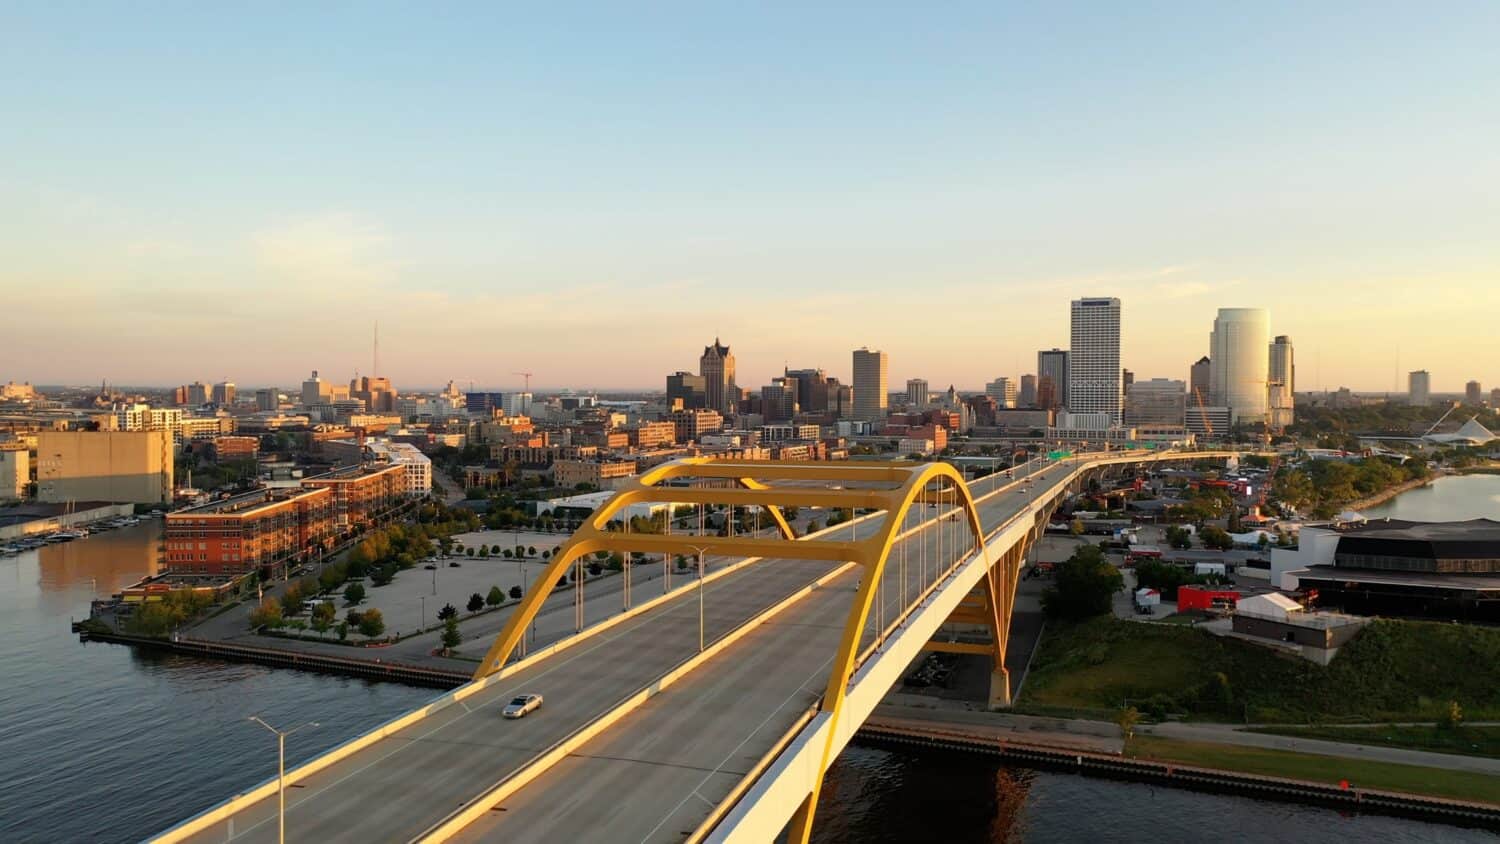 Aerial view of Hoan Memorial Bridge, highway in Milwaukee, Wisconsin, USA. Highway, traffic in morning at sunrise, Downtown in the background. Cityscape, Skyline